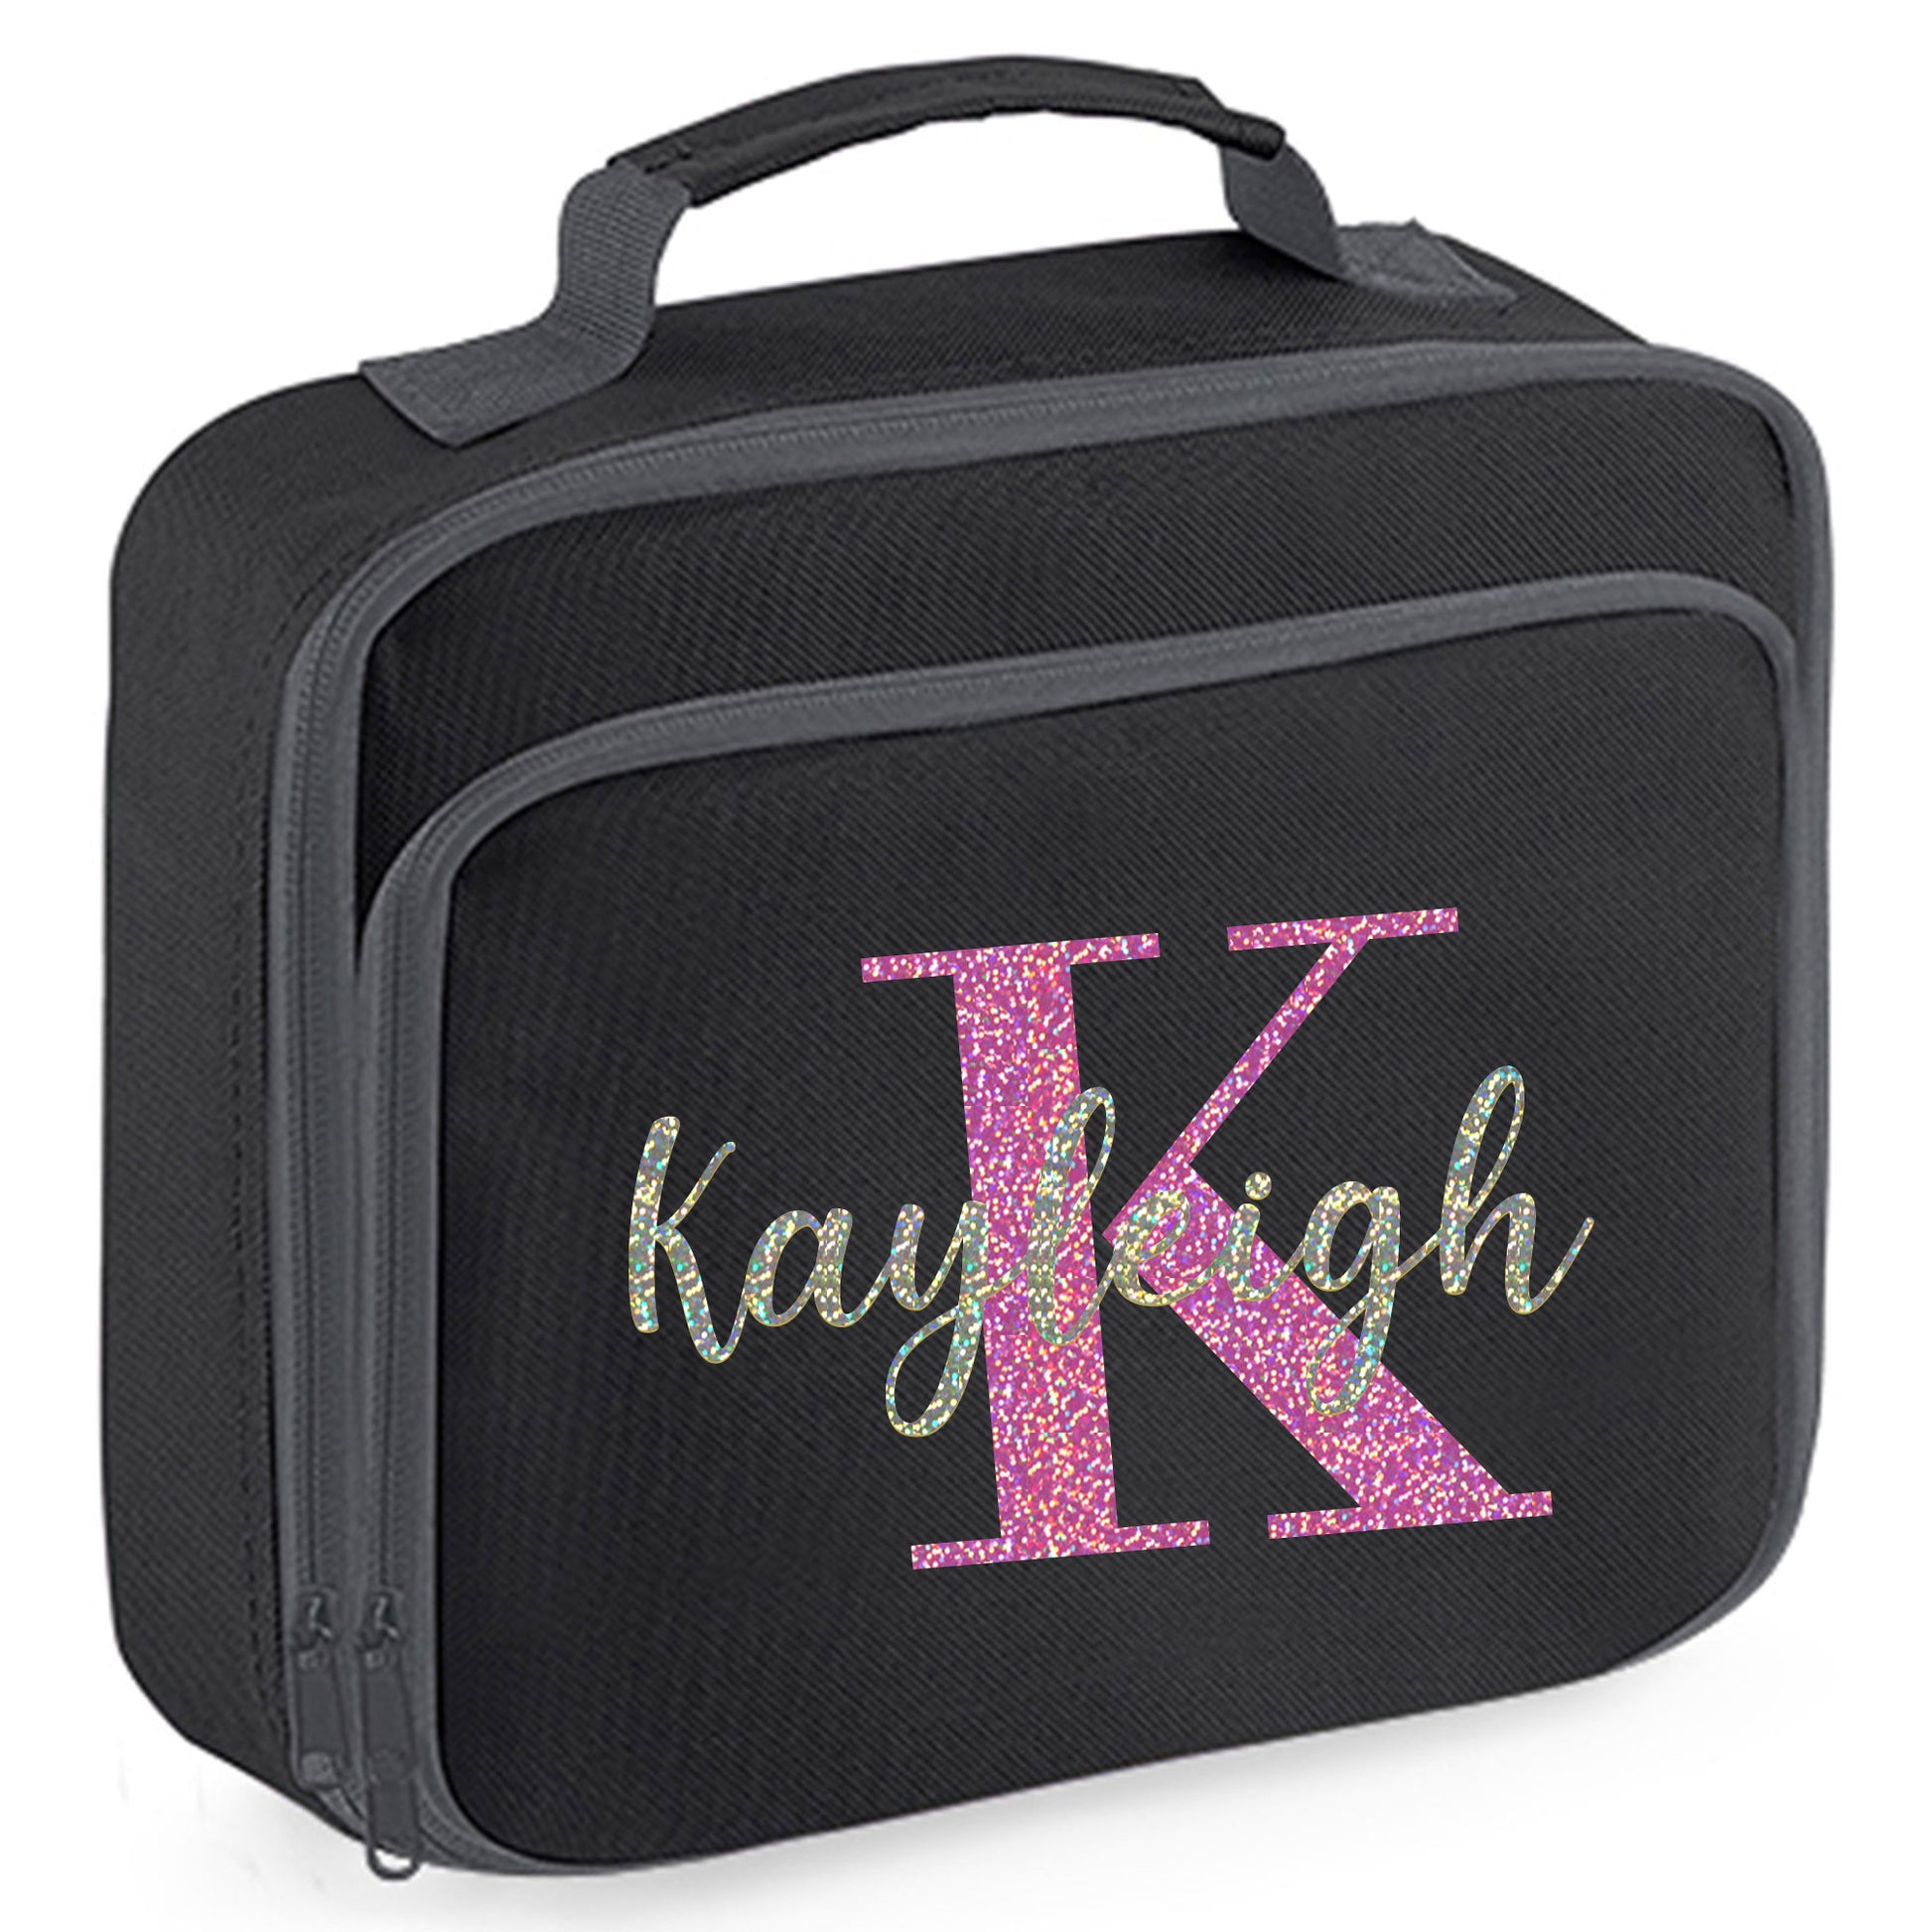 Personalised Lunch Bag with Name Childs School Lunch Box  - Always Looking Good - Black  